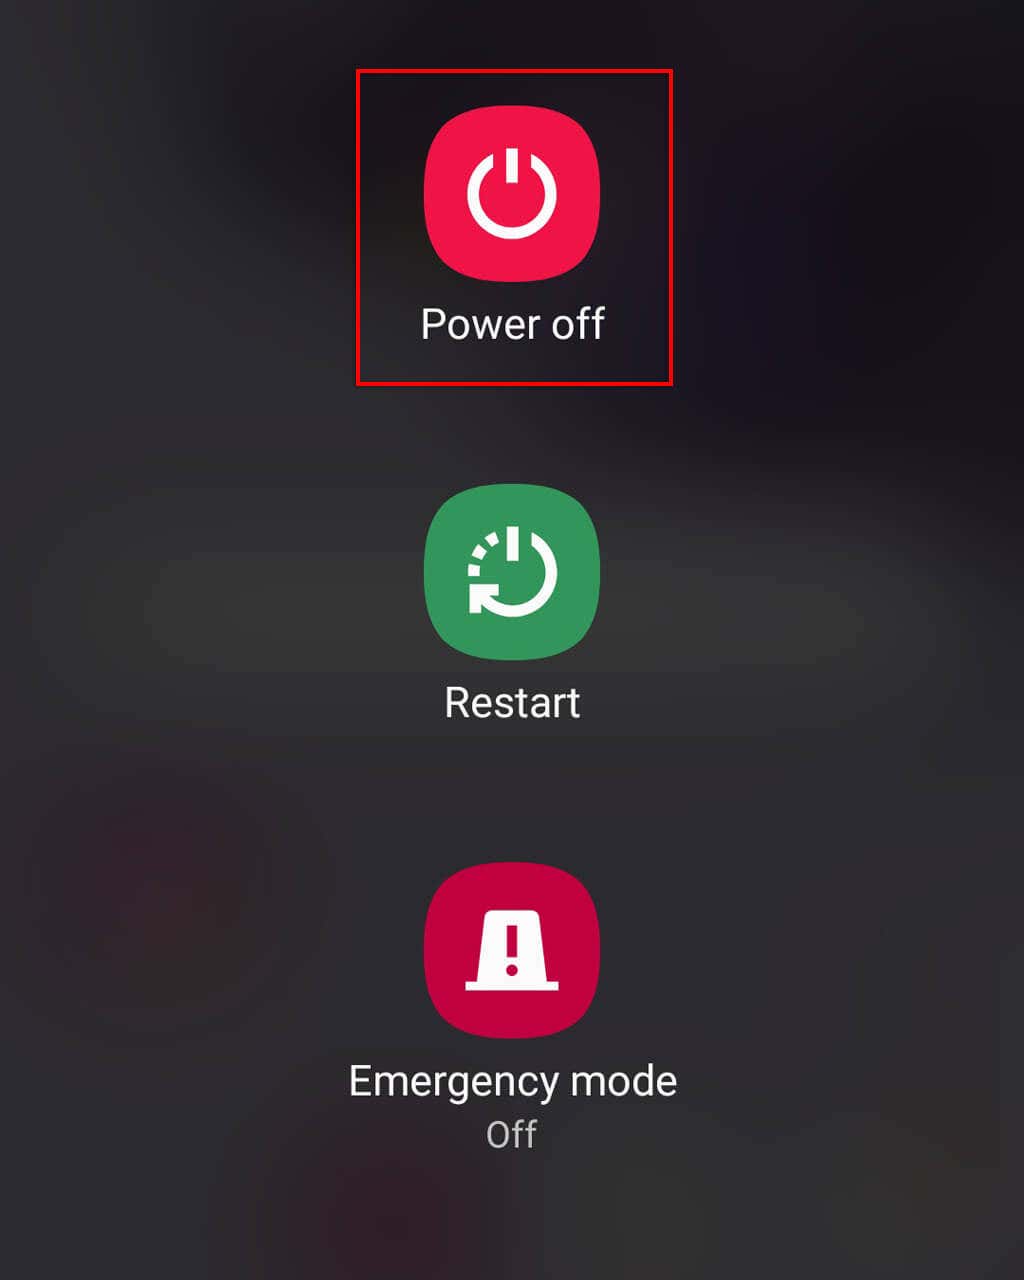 Press and hold the power button until the "Power off" option appears on the screen.
Select "Power off" and wait for your phone to turn off completely.